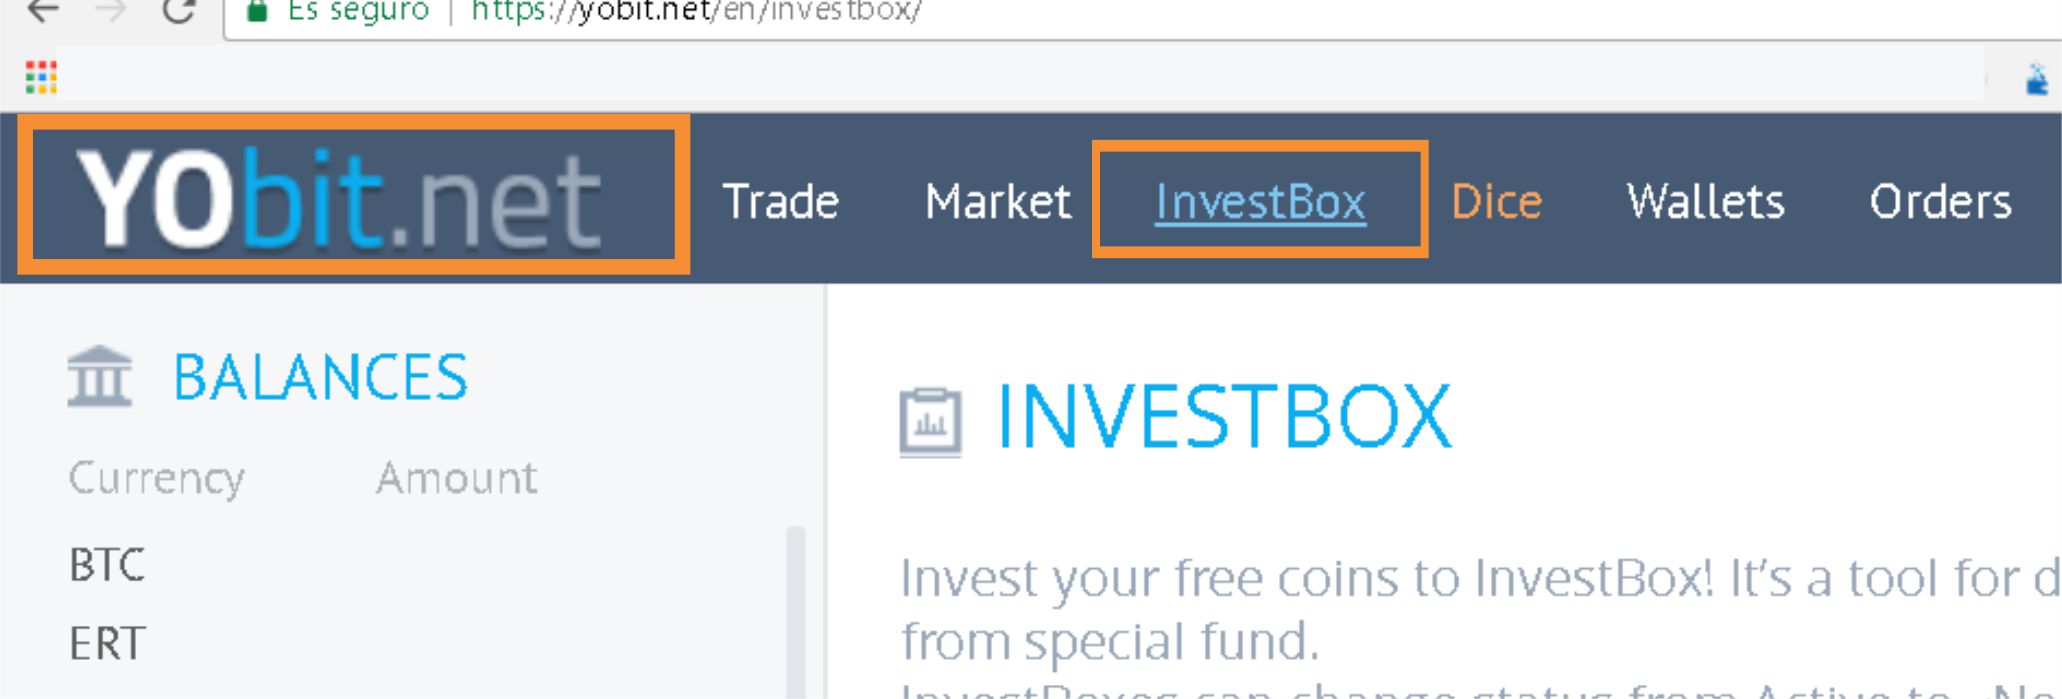 Liza Fever Investbox 10 Daily In Yobit Steemkr